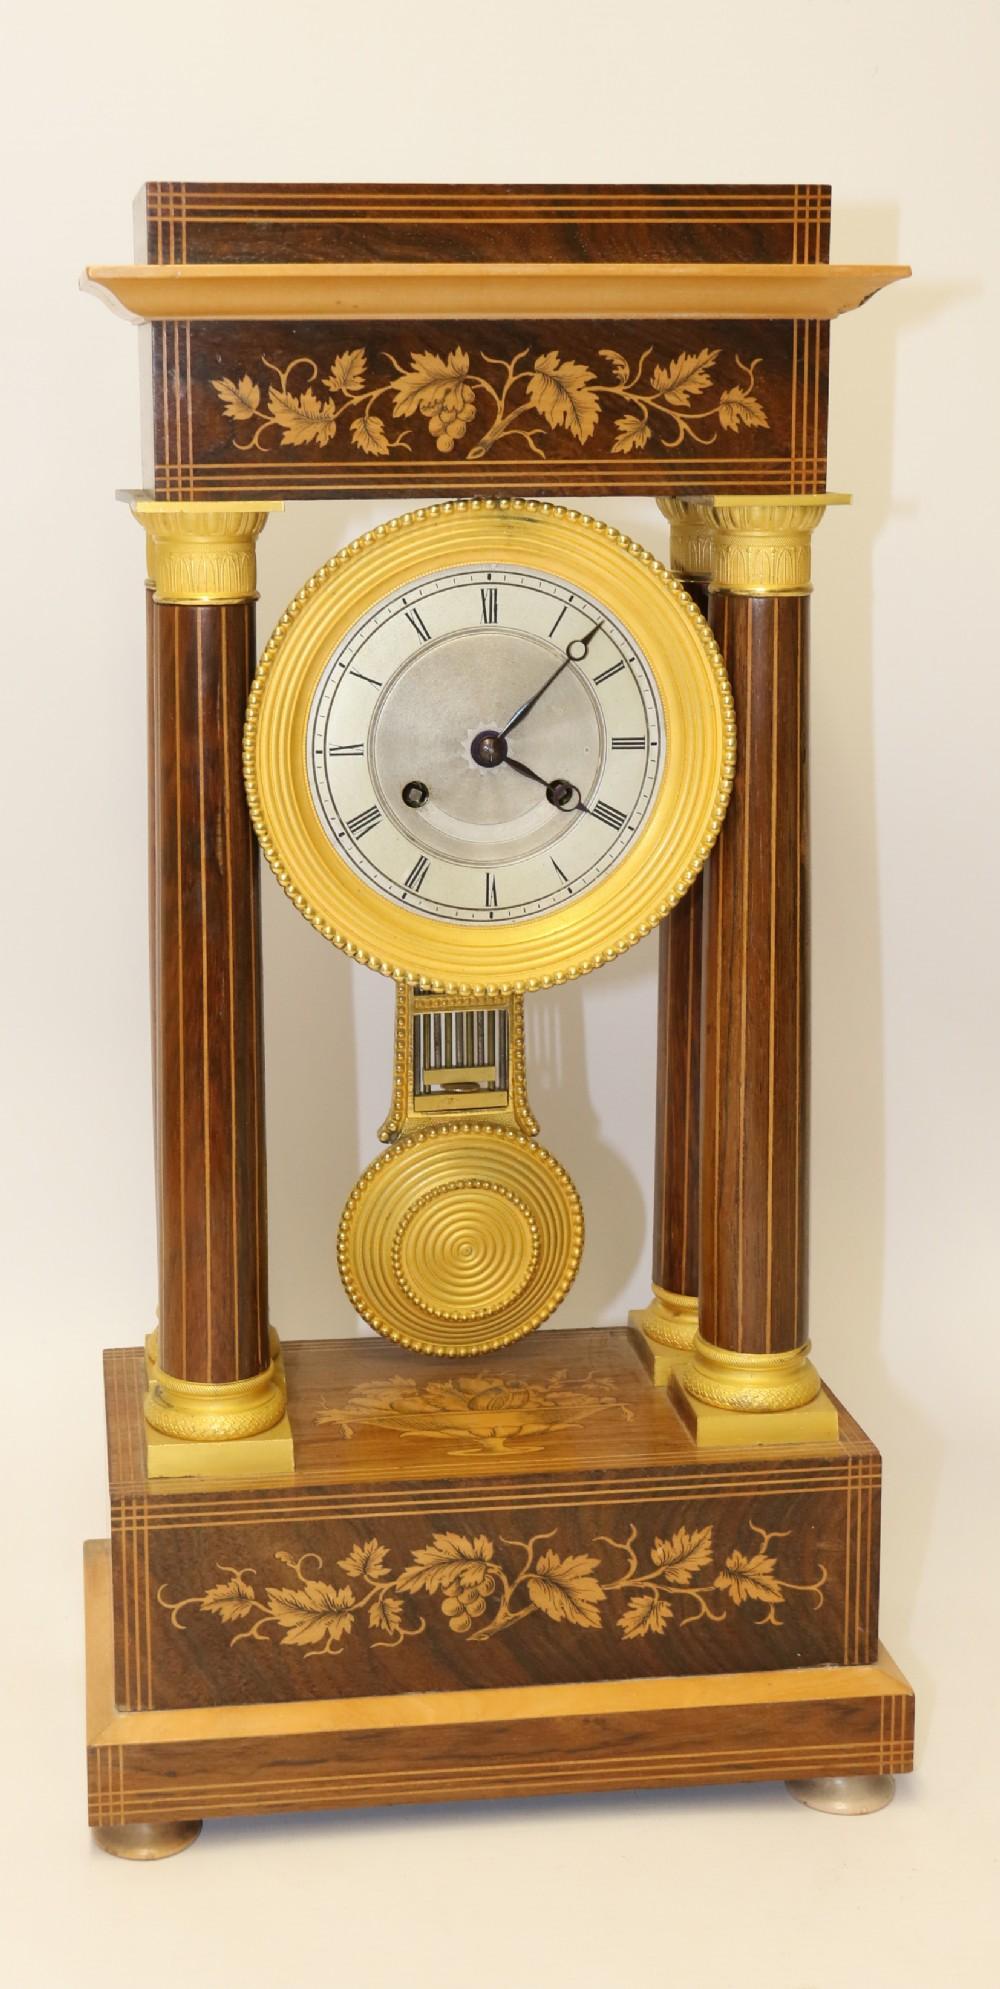 This fine example of a French Portico clock is top quality and made circa 1830.
It has a 14 day movement striking on the hour and half hour on a delicate sounding bell.
The pendulum hangs off an early silk suspension. The movement is in good